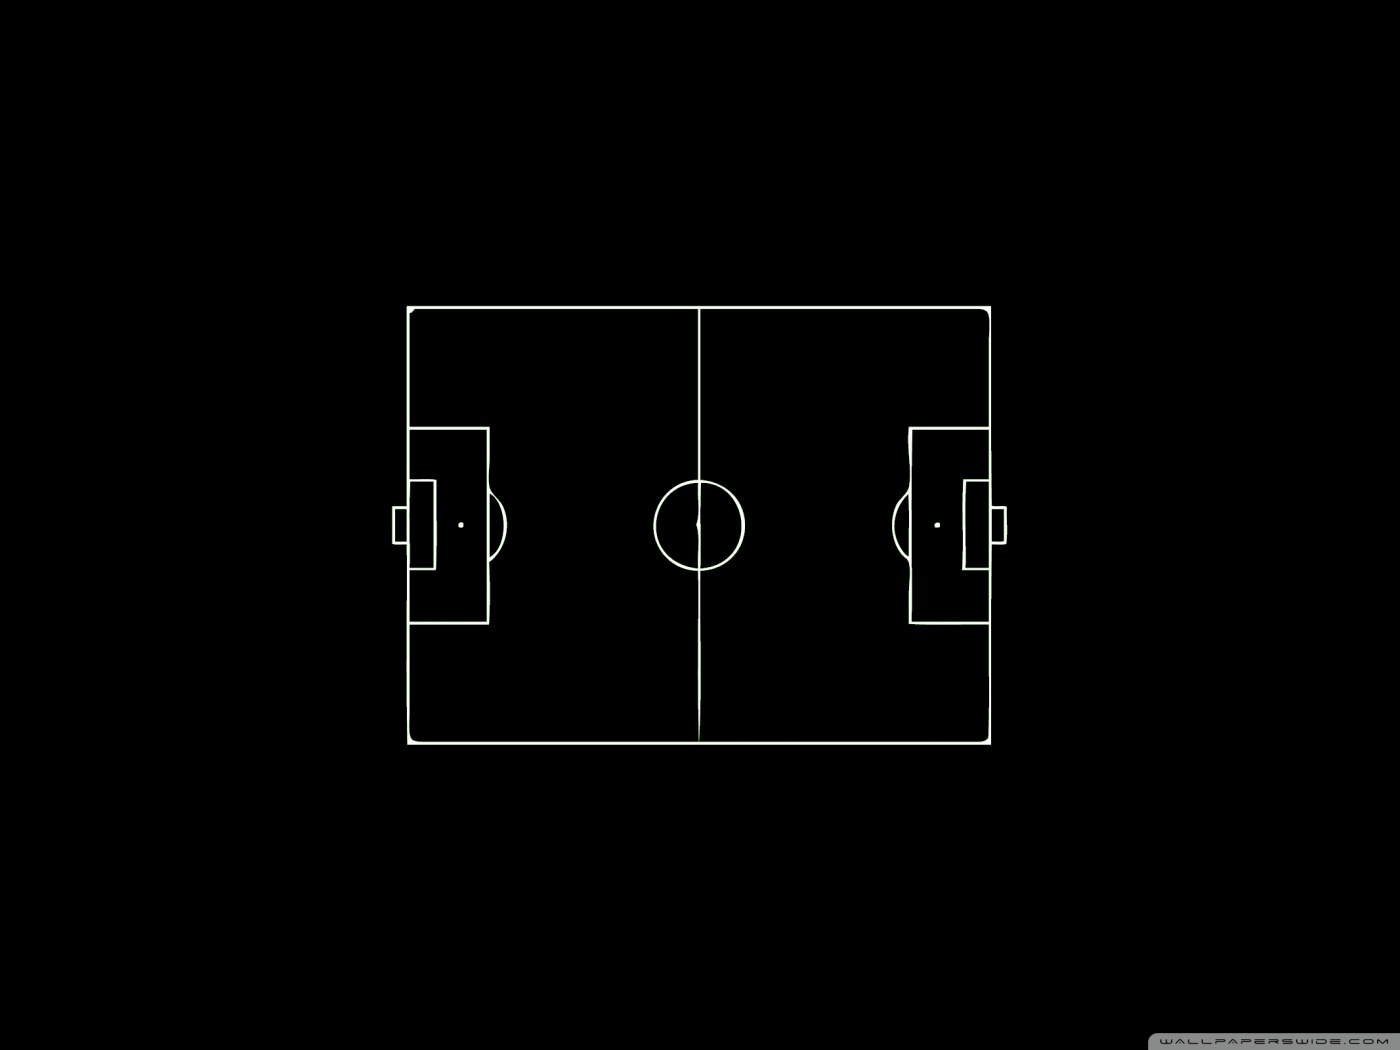 Football Pitch Layout Black And White